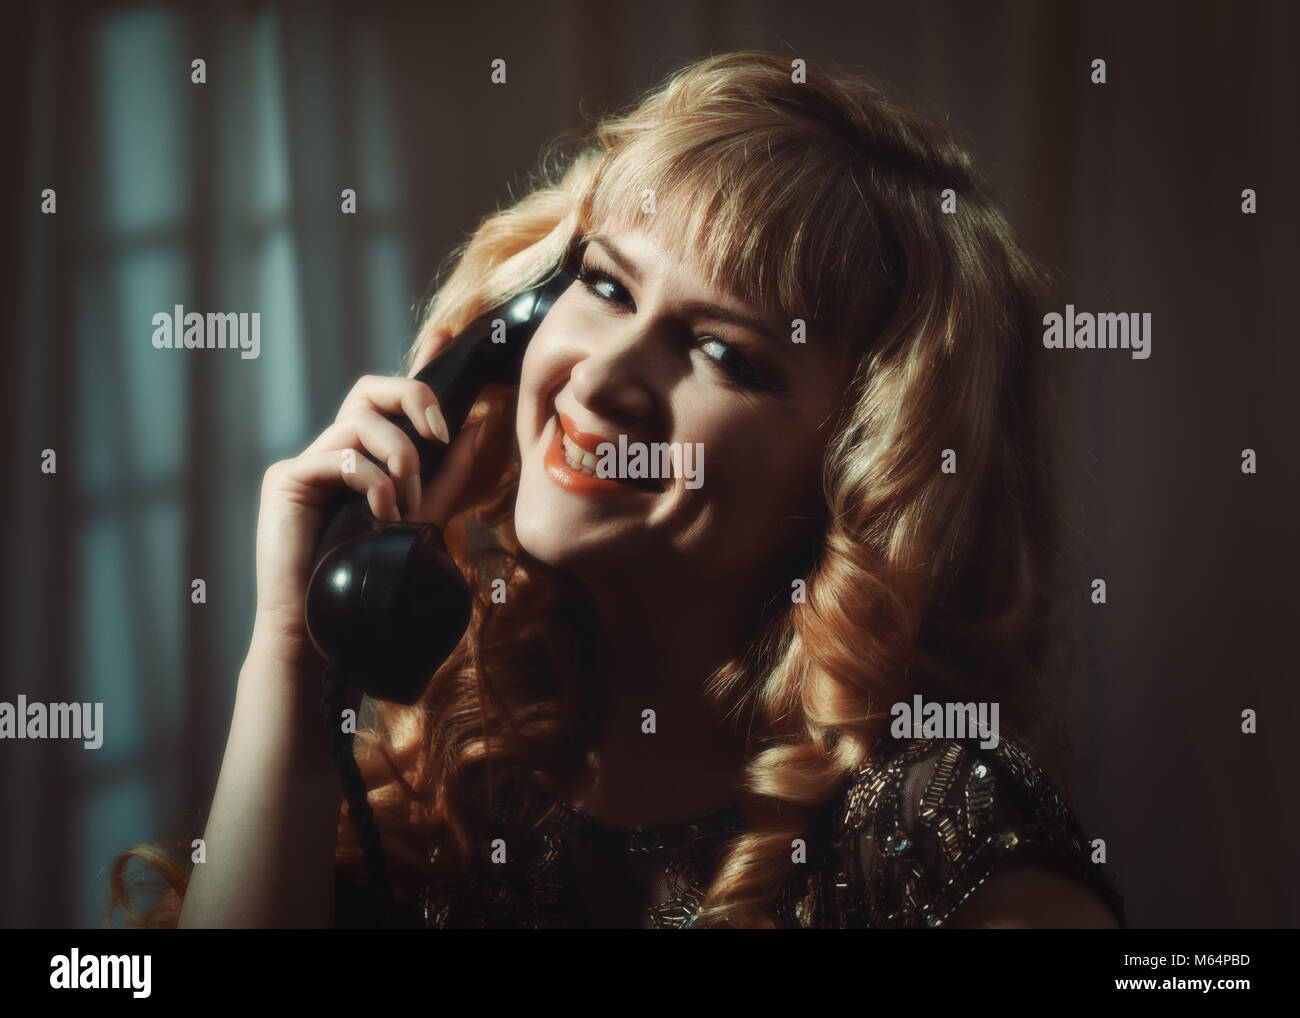 Portrait of woman in vintage style clothing on telephone Stock Photo